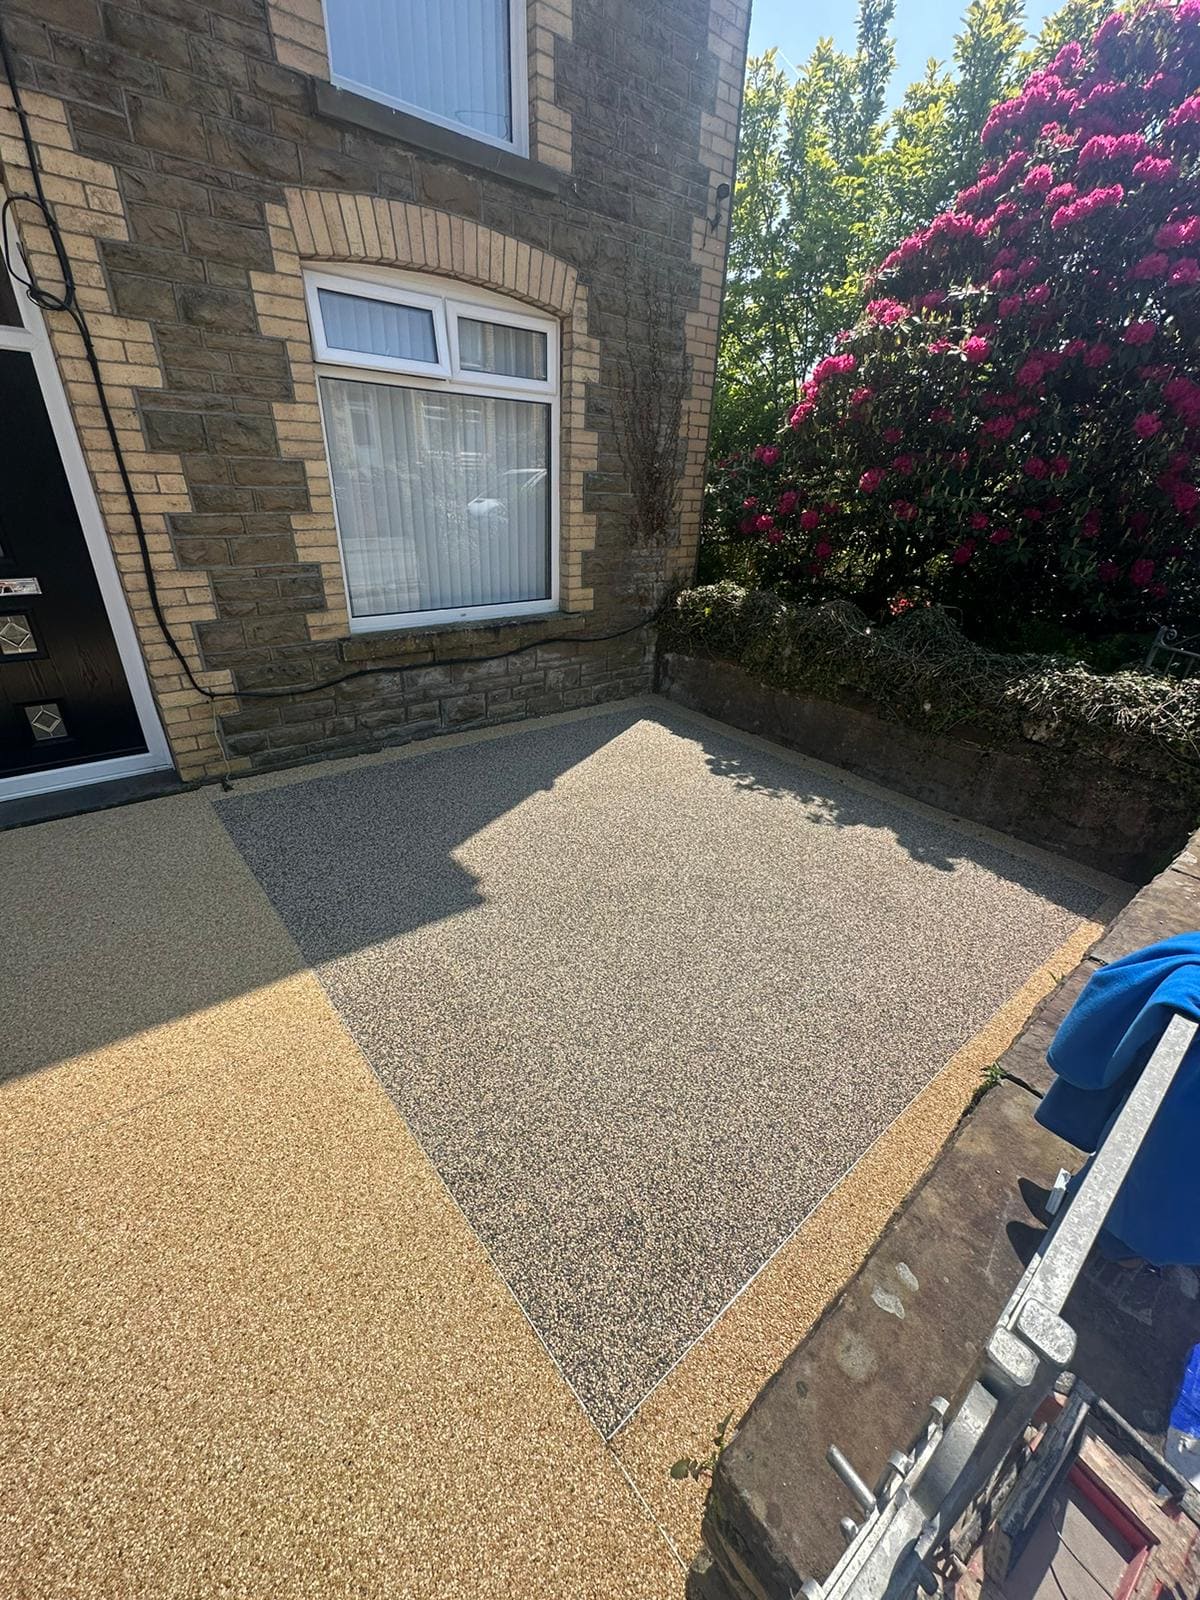 Left angled view of new resin bound solution laid in front garden of property in ystalyfera using high quality Vuba products